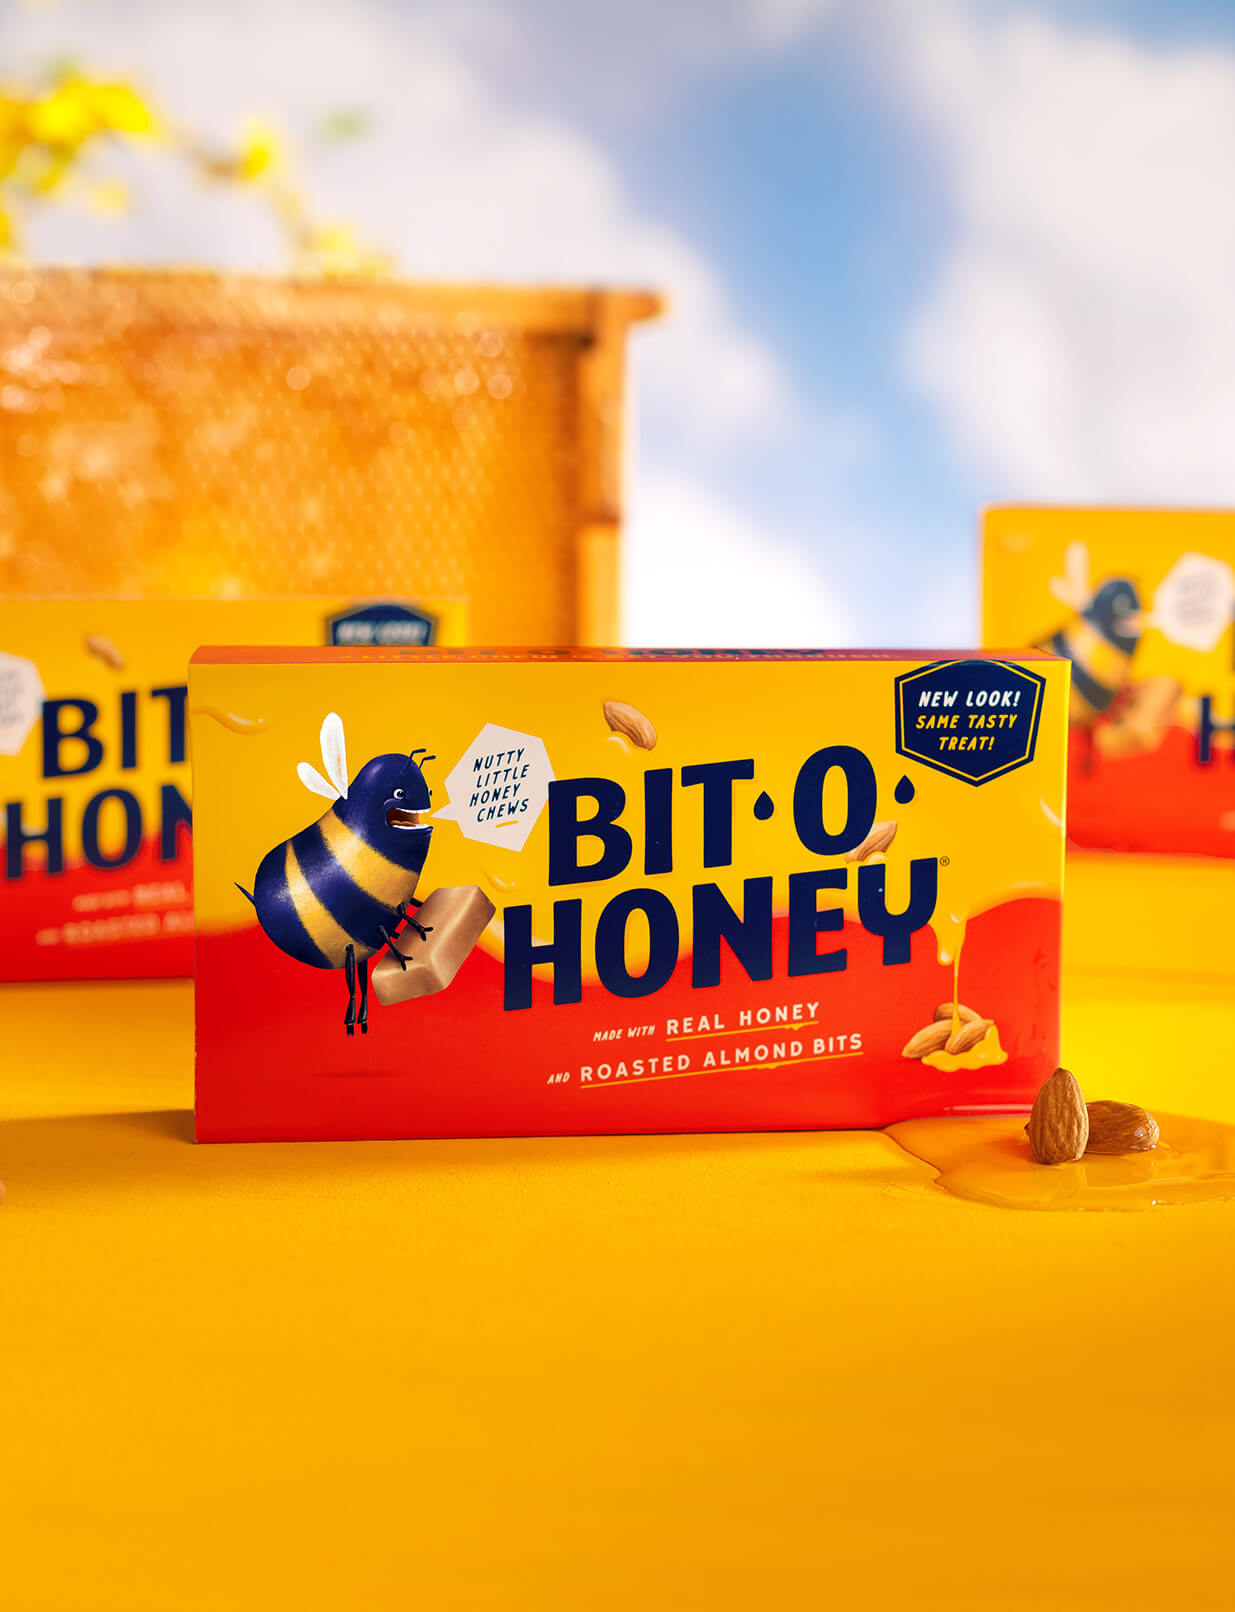 Two boxes of Bit-O-Honey candies sit in front of a honeycomb